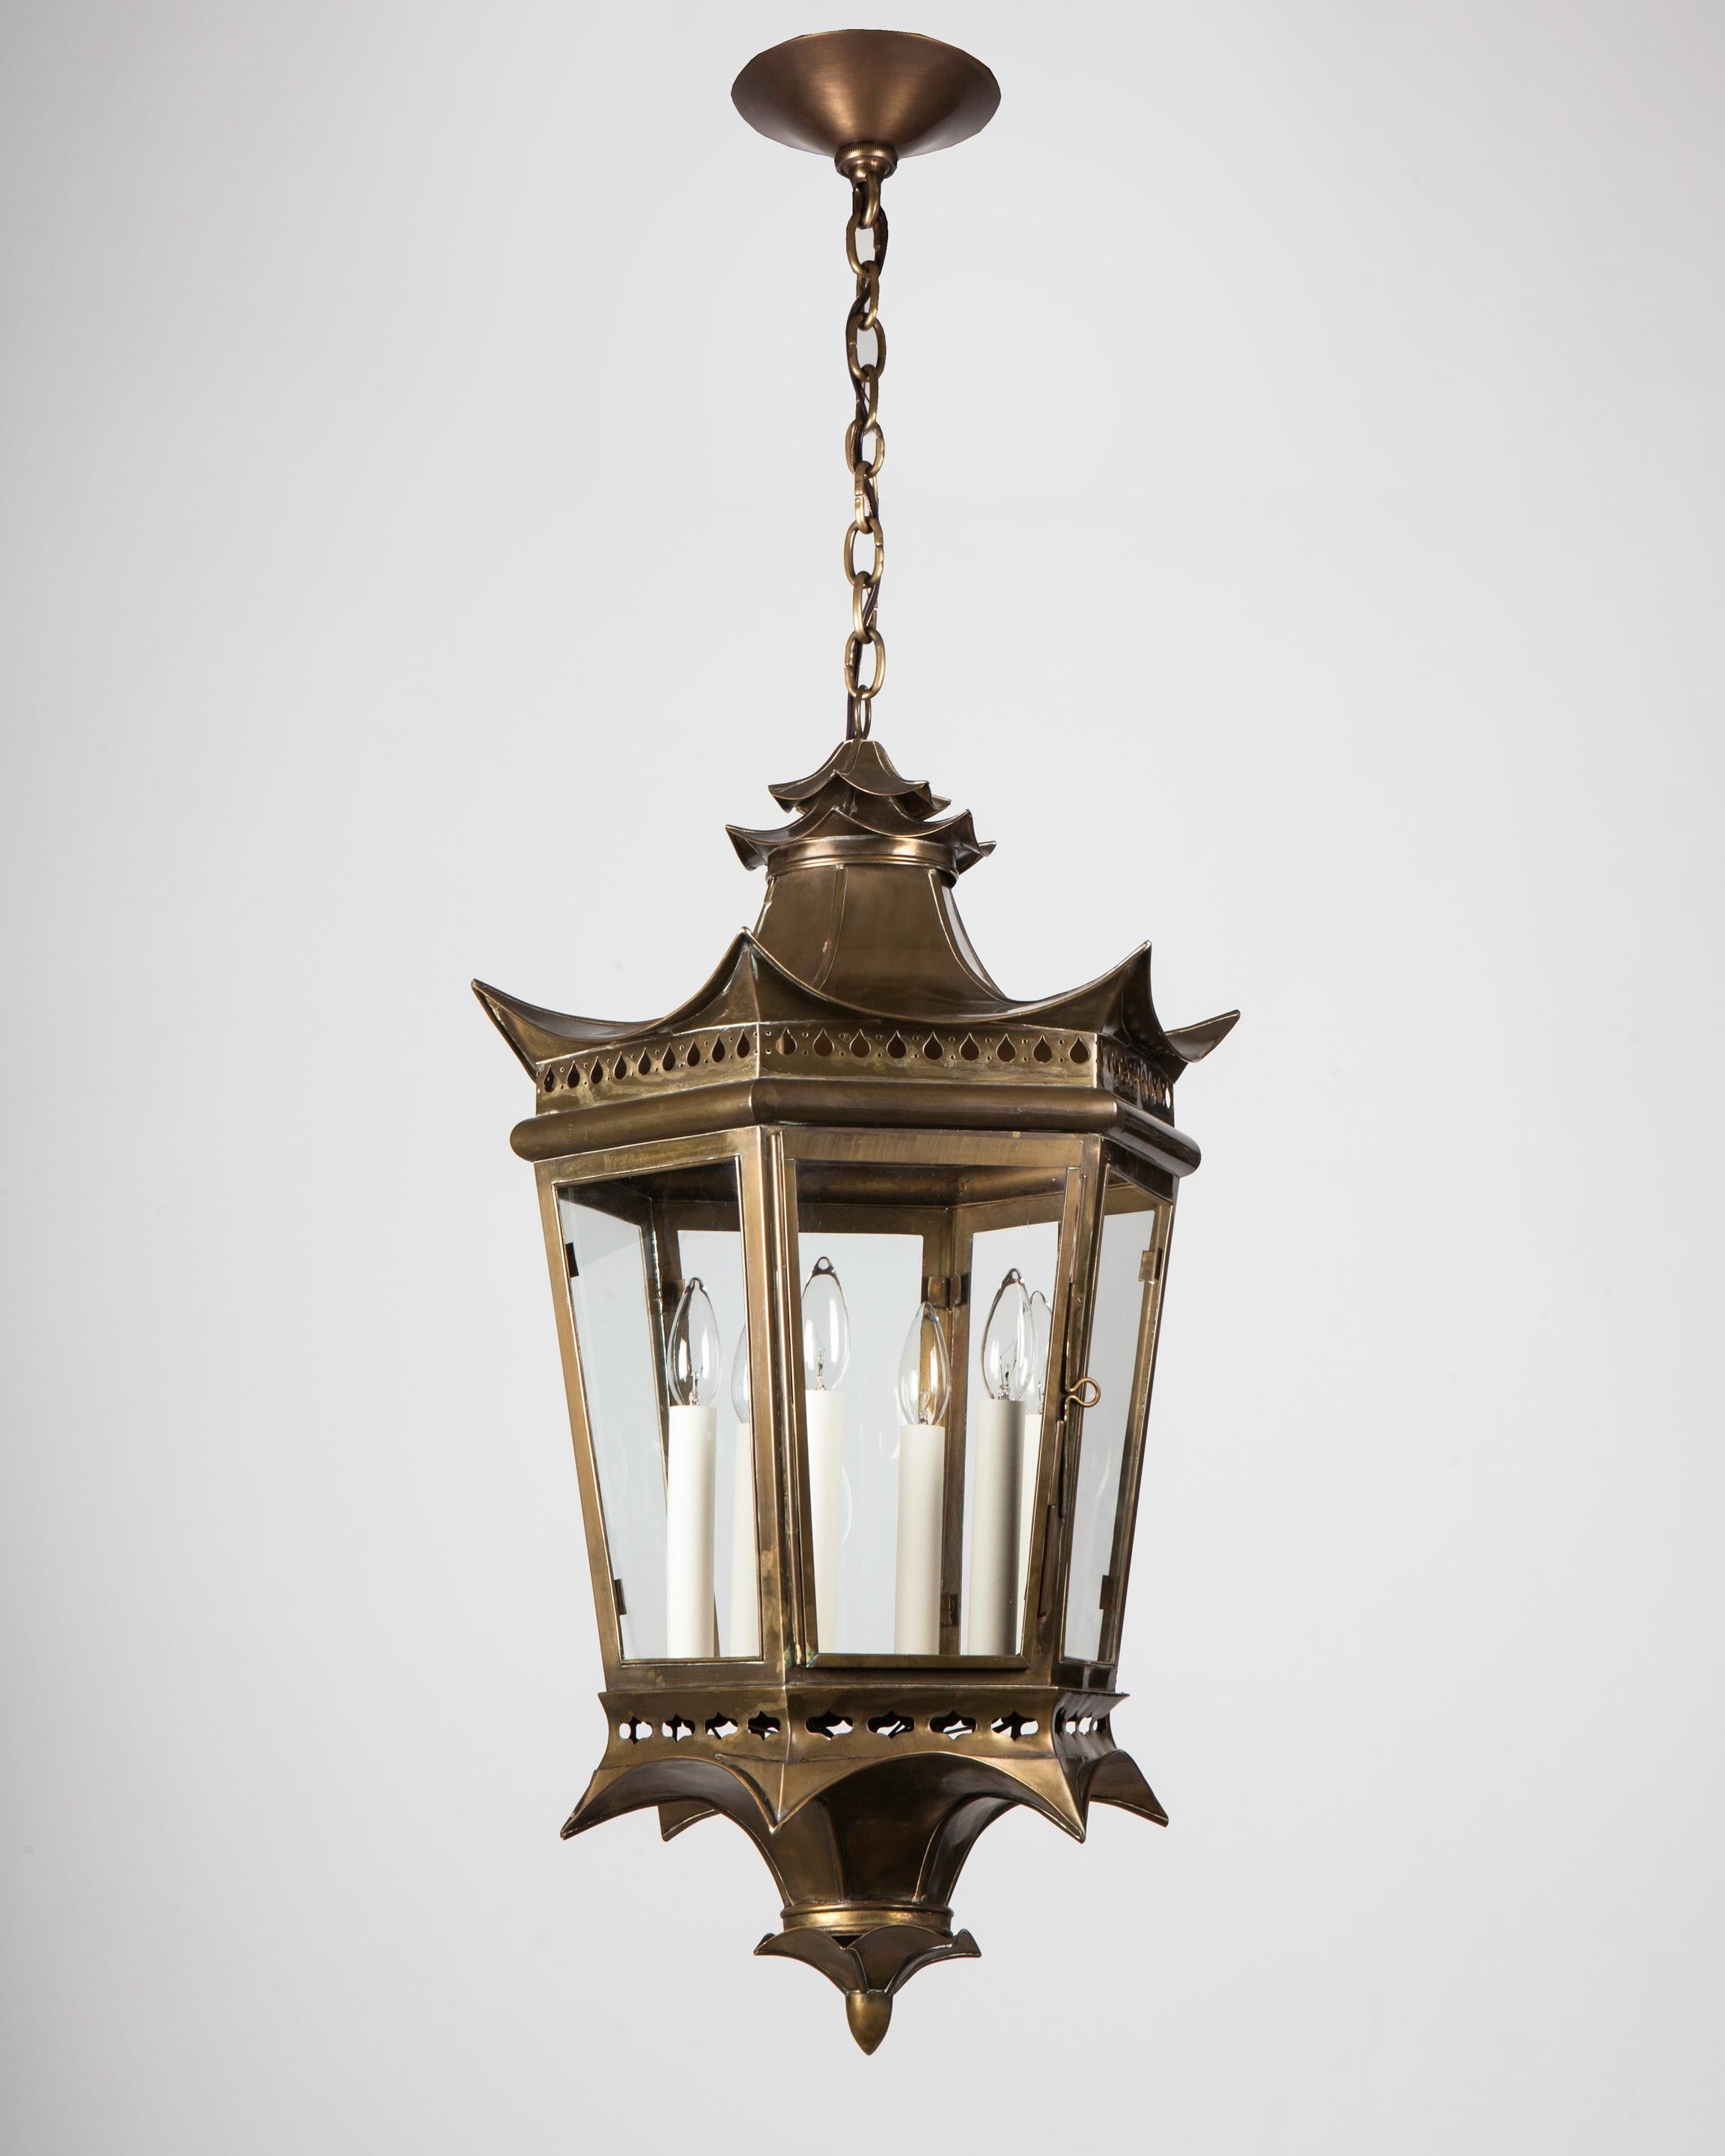 Patinated Vintage Hexagonal Pagoda Form Brass Lantern with Pierced Details, Circa 1940s For Sale